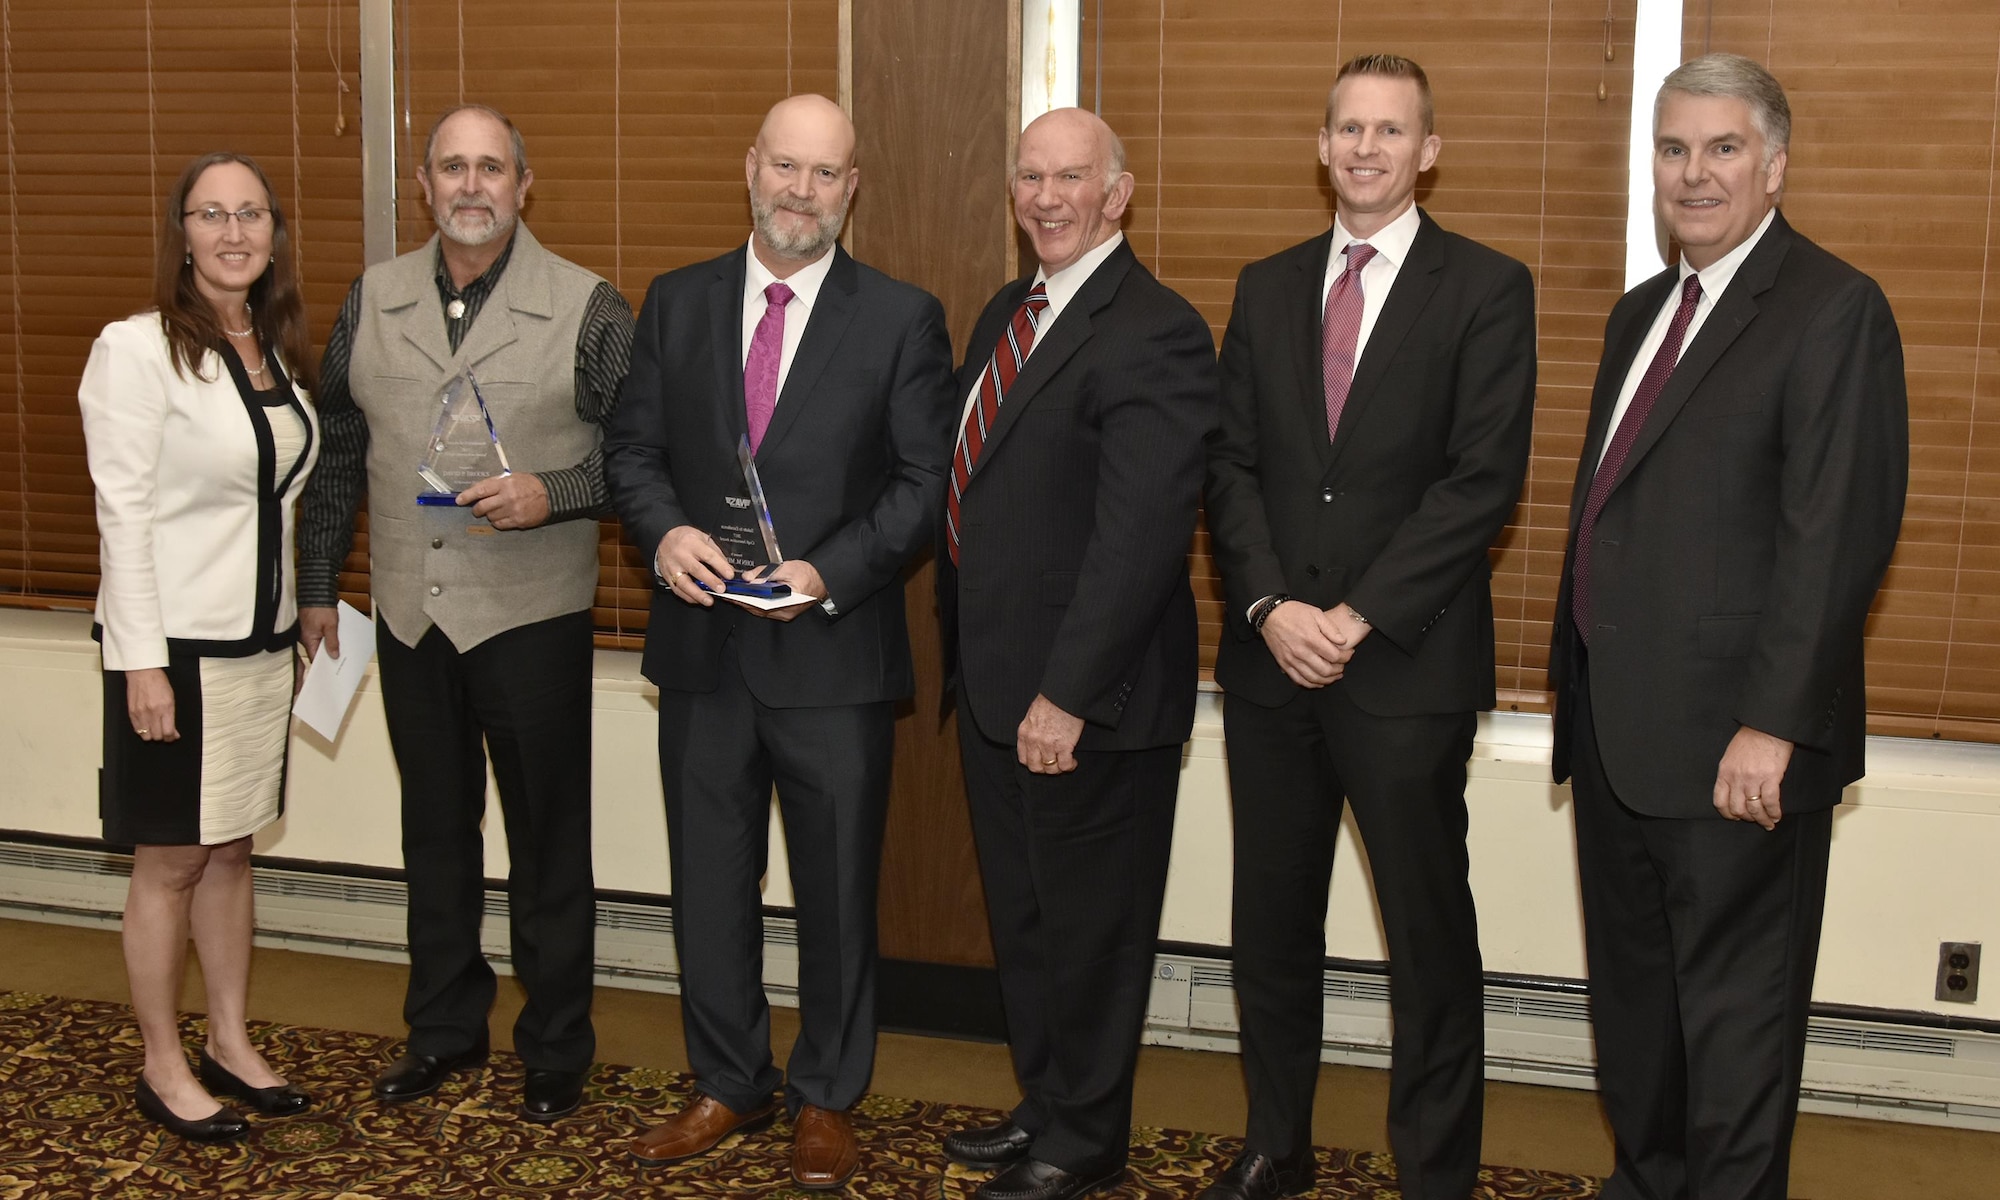 David Brooks (second from left) and John Meeks (3rd from left), both NAS outside machinists, receive the Craft Innovation Award from NAS General Manager Cynthia Rivera during the National Aerospace Solutions 2017 Salute to Excellence Annual Awards Banquet held Nov. 16 at the Arnold Lakeside Center, Arnold AFB. Also pictured is NAS Deputy General Manager Doug Pearson, NAS Integrated Resources Director Ben Souther and NAS Test and Sustainment Engineering Manager Jeff Henderson. (U.S. Air Force photo/Rick Goodfriend)